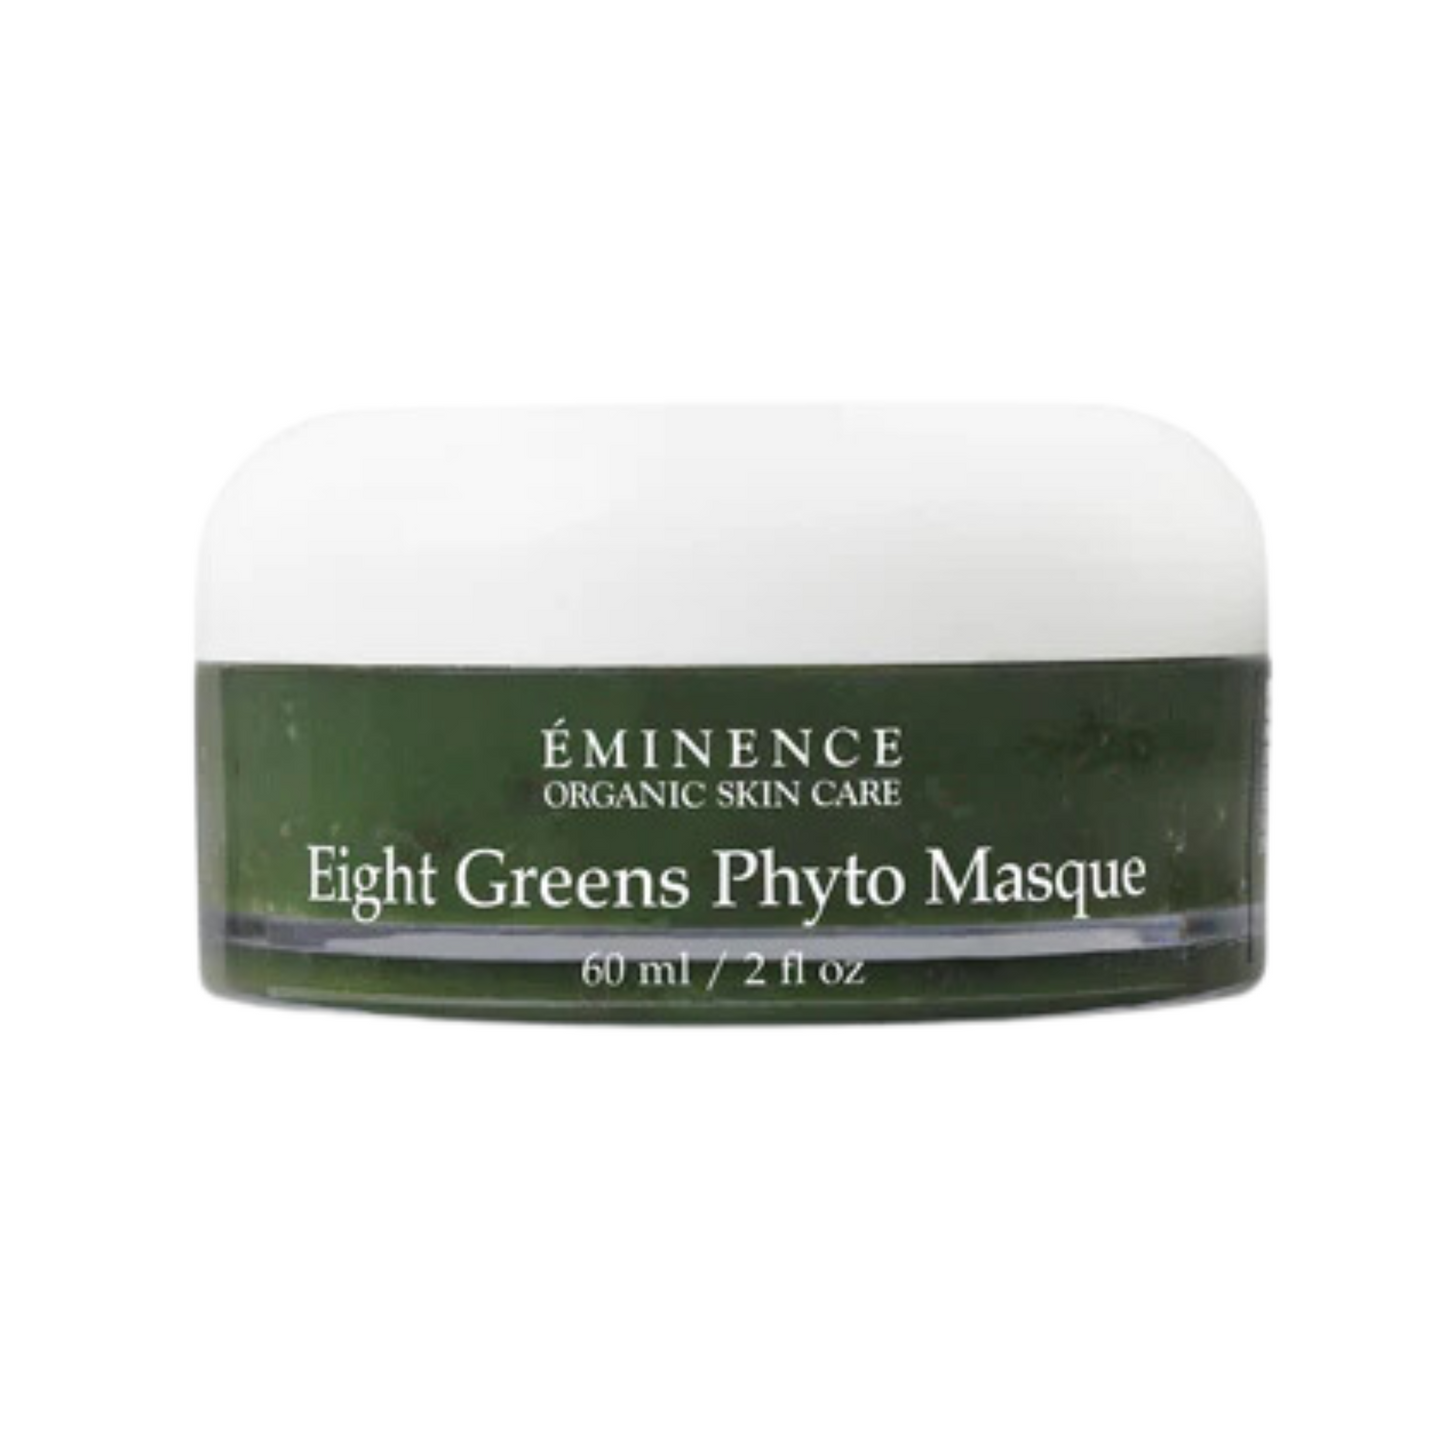 Eight Greens Phyto Masque (Not Hot) - Eminence Organic Skin Care